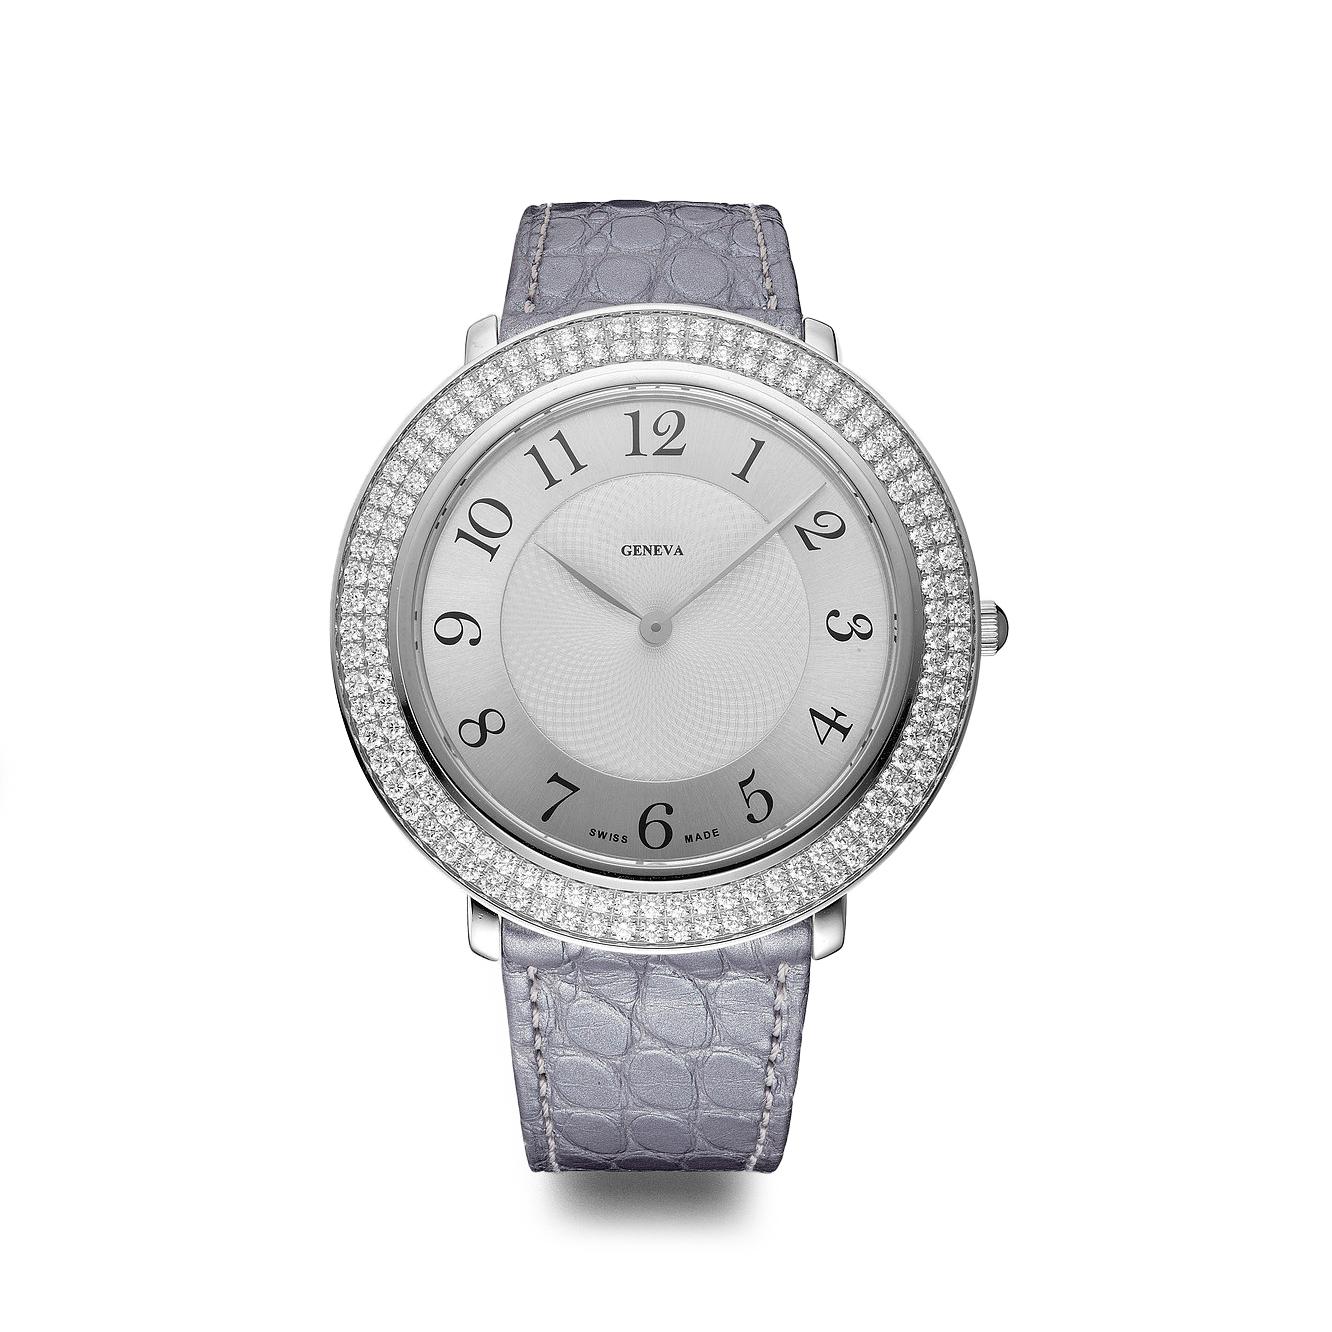 Watch in steel, silver dial, bezel set with 138 diamonds 2.52 cts with prong buckle alligator strap quartz movement.

We do not guarantee the functioning of this watch.